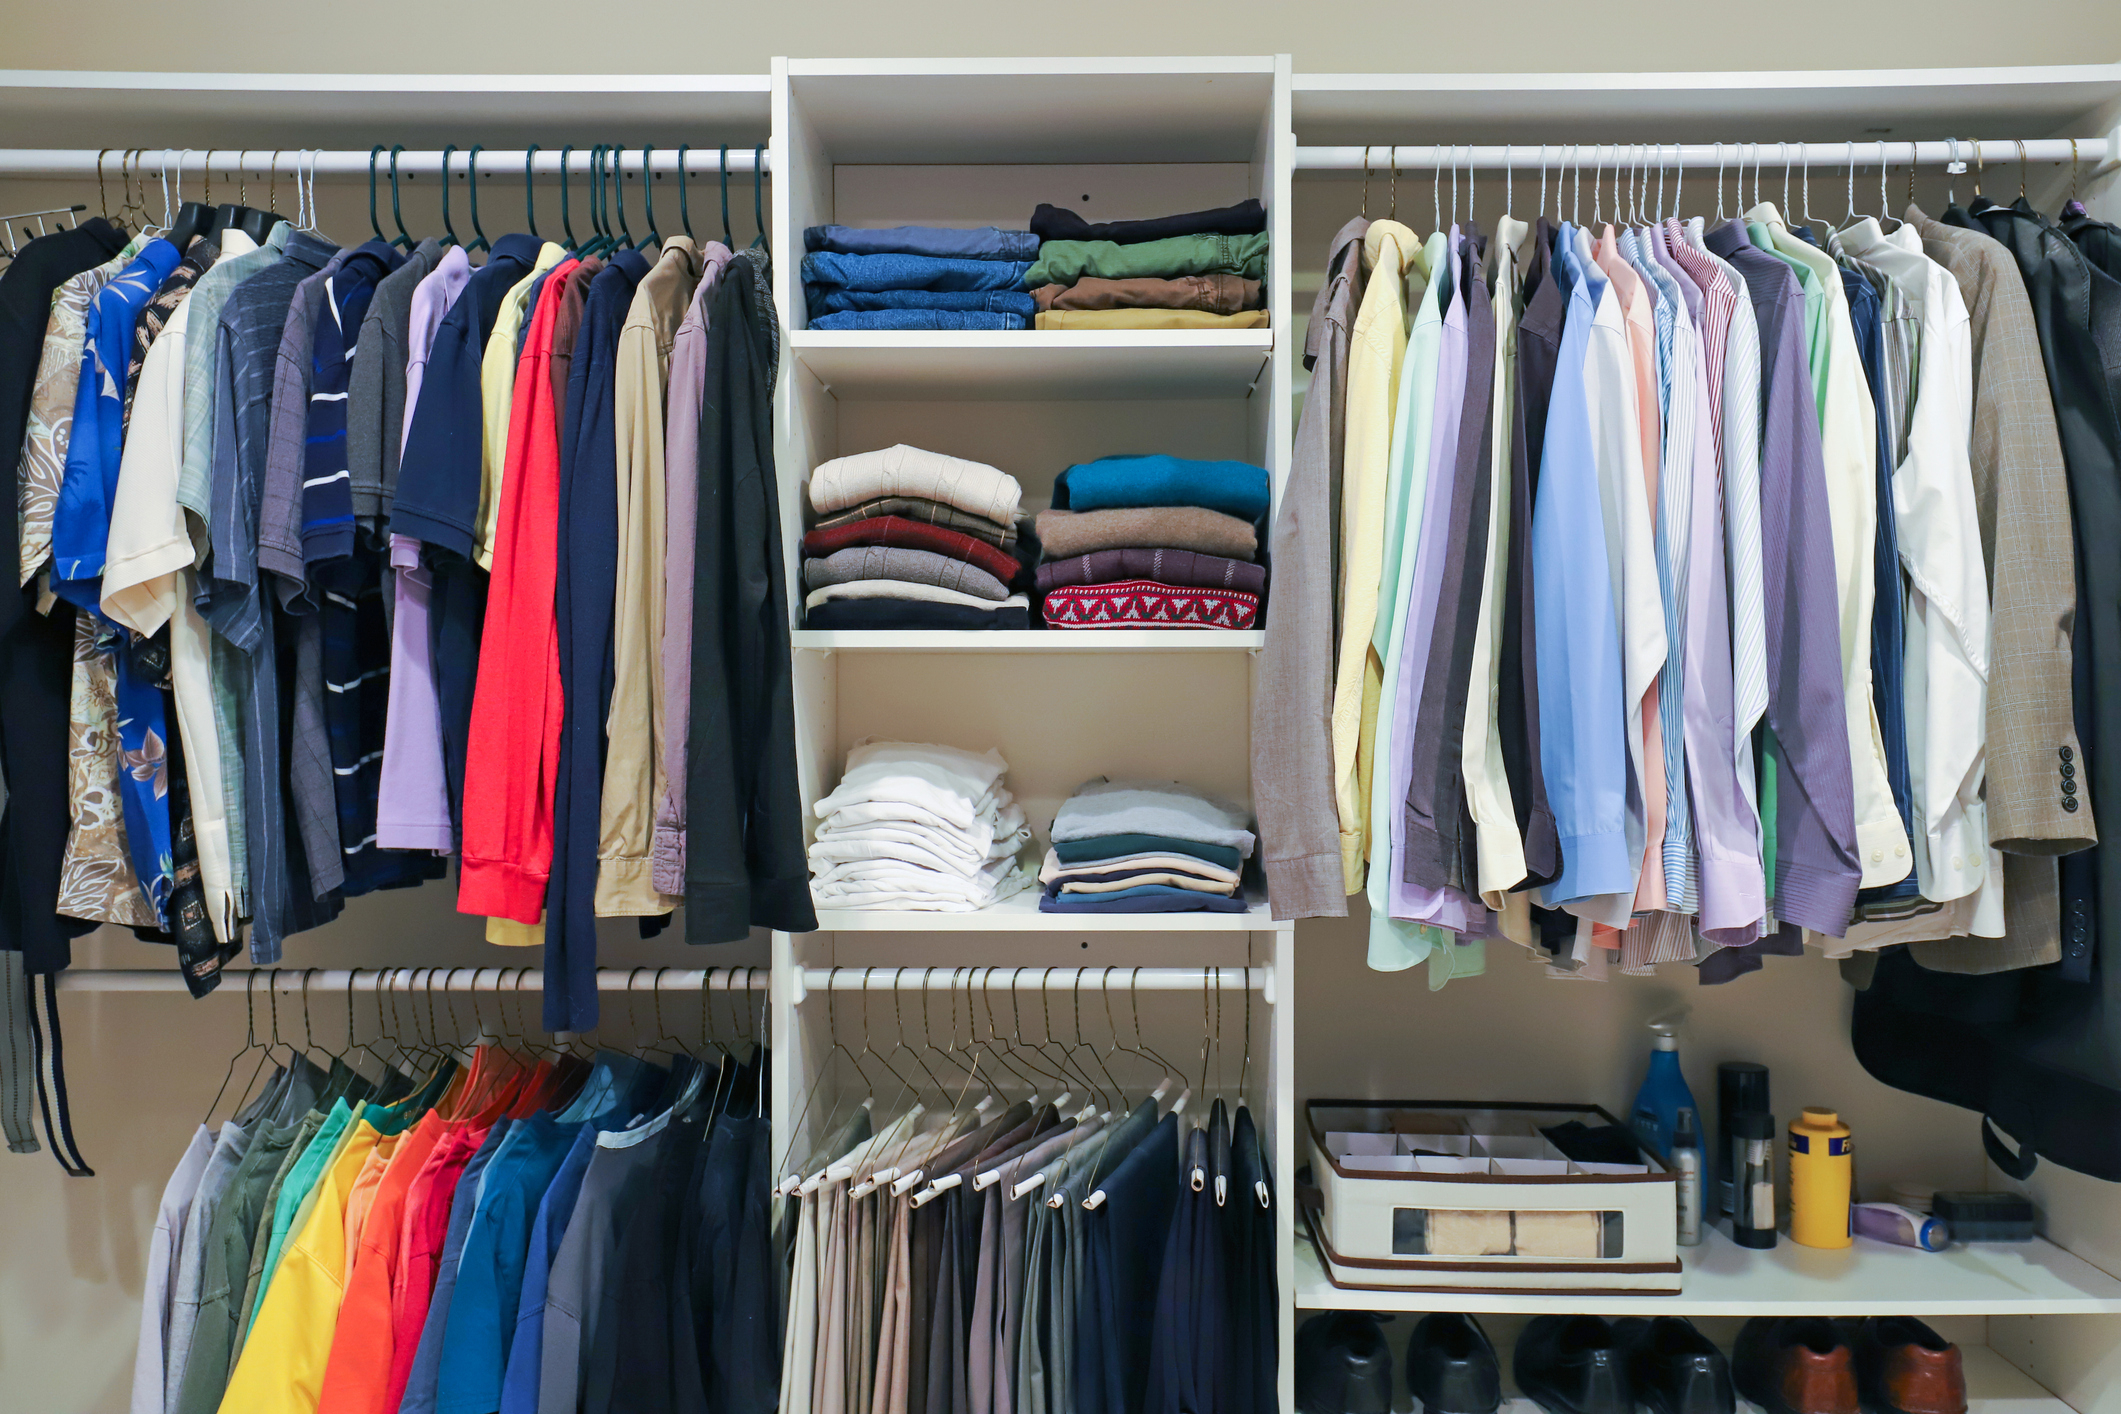 Organized closet with neatly arranged clothes and shelves with folded items